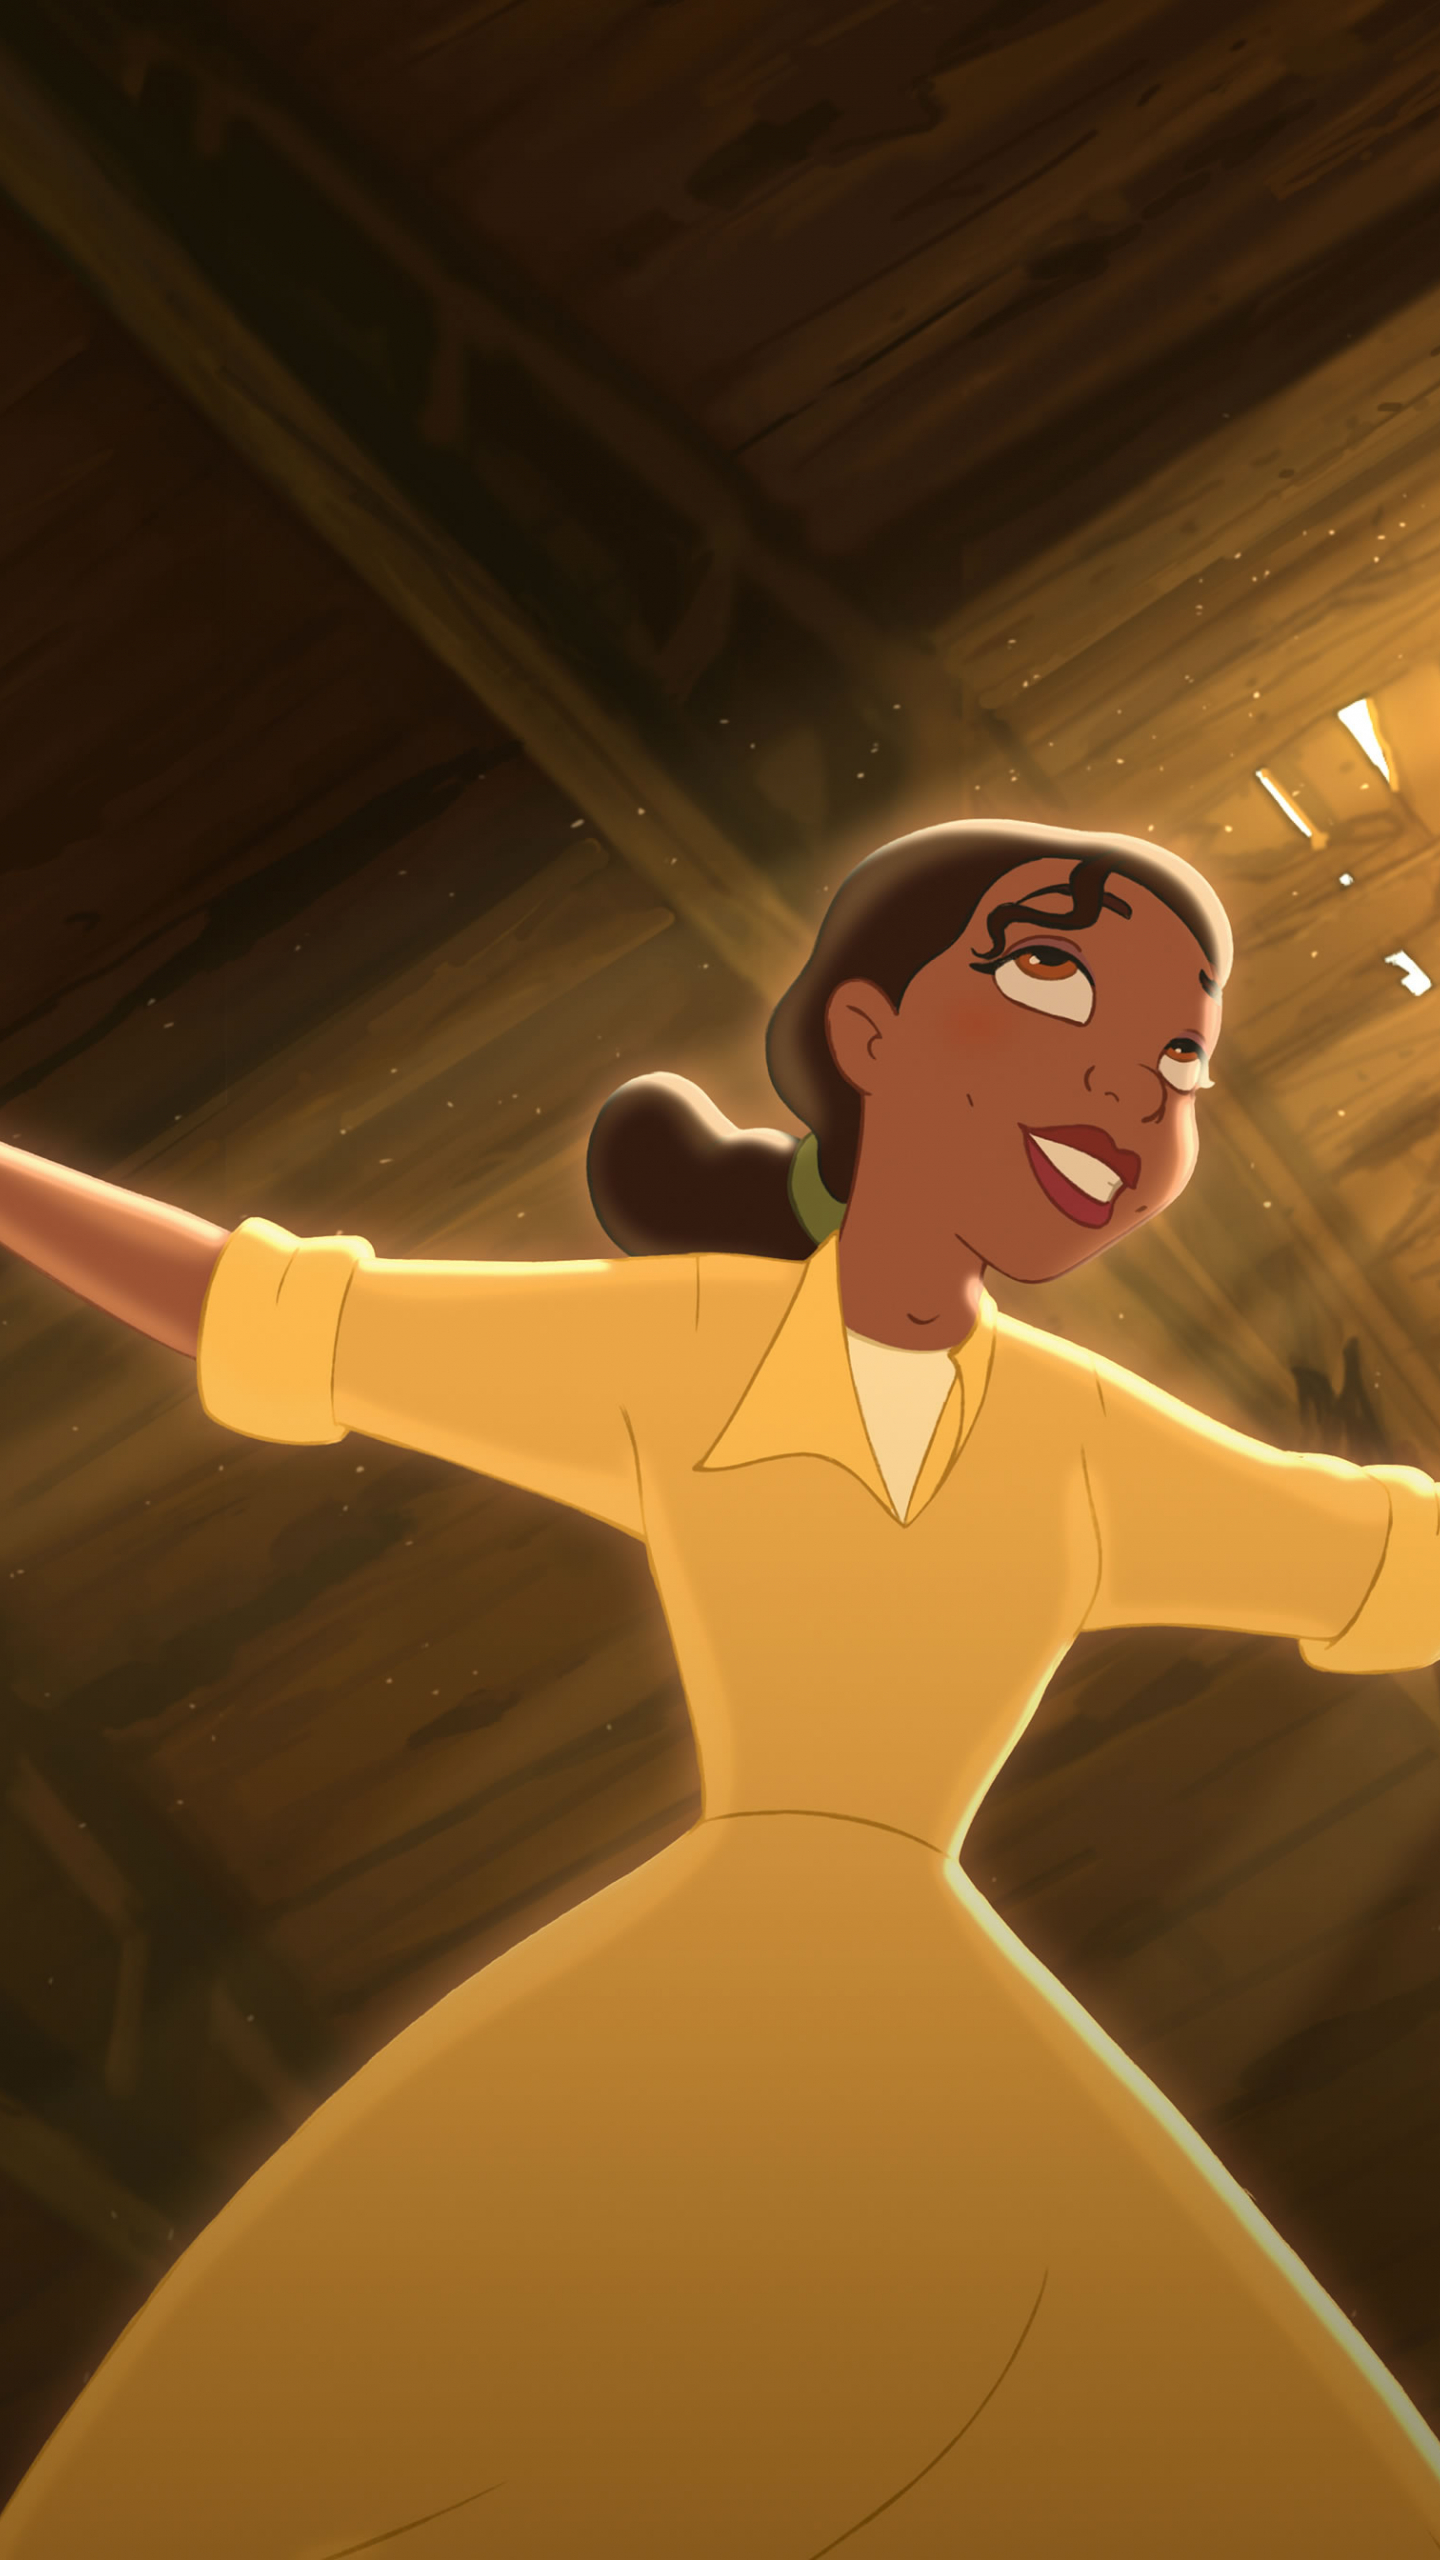 1440x2560 Free download What do you think of The Princess and the Frog Where would you rank [5100x2688] for your Desktop, Mobile \u0026 Tablet | Explore 50+ Princess and the Frog Wallpaper